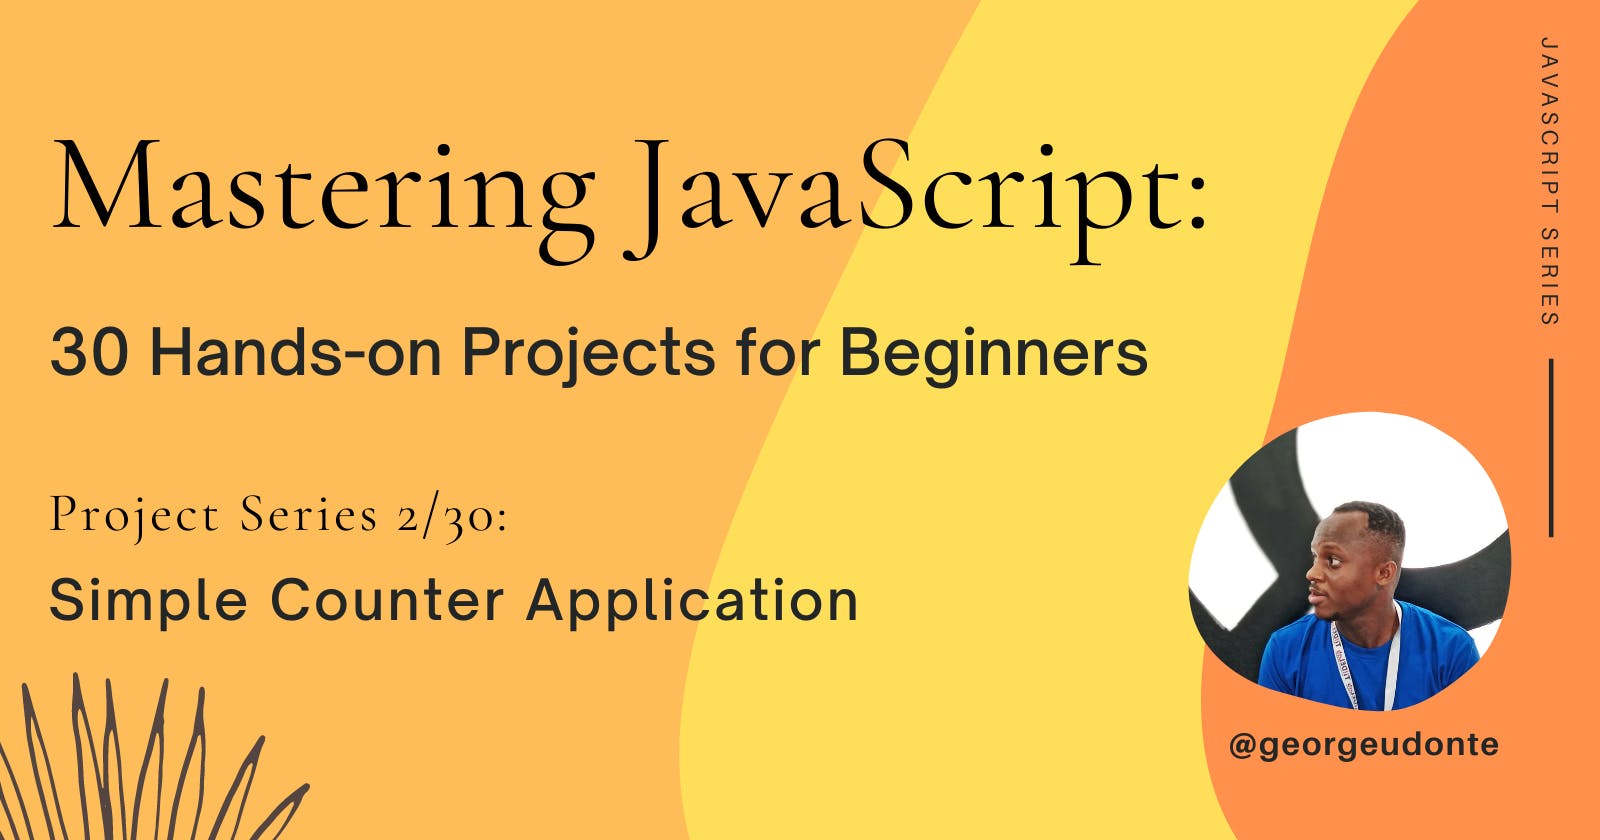 Mastering JavaScript: 30 Hands-on Projects for Beginners (Project Series 2/30)